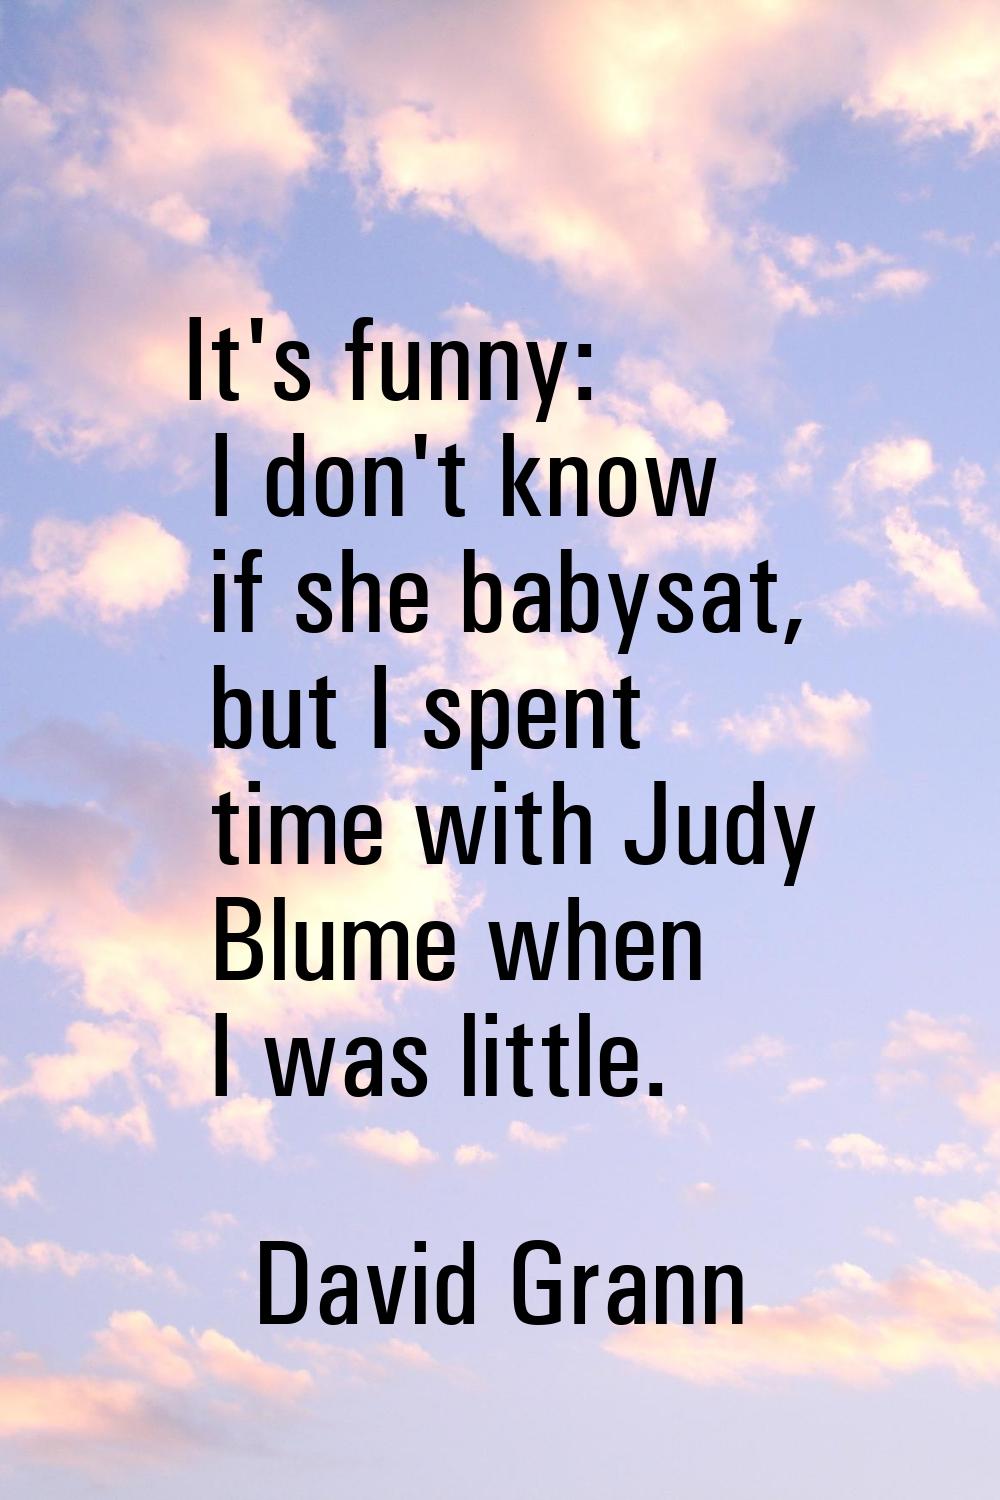 It's funny: I don't know if she babysat, but I spent time with Judy Blume when I was little.